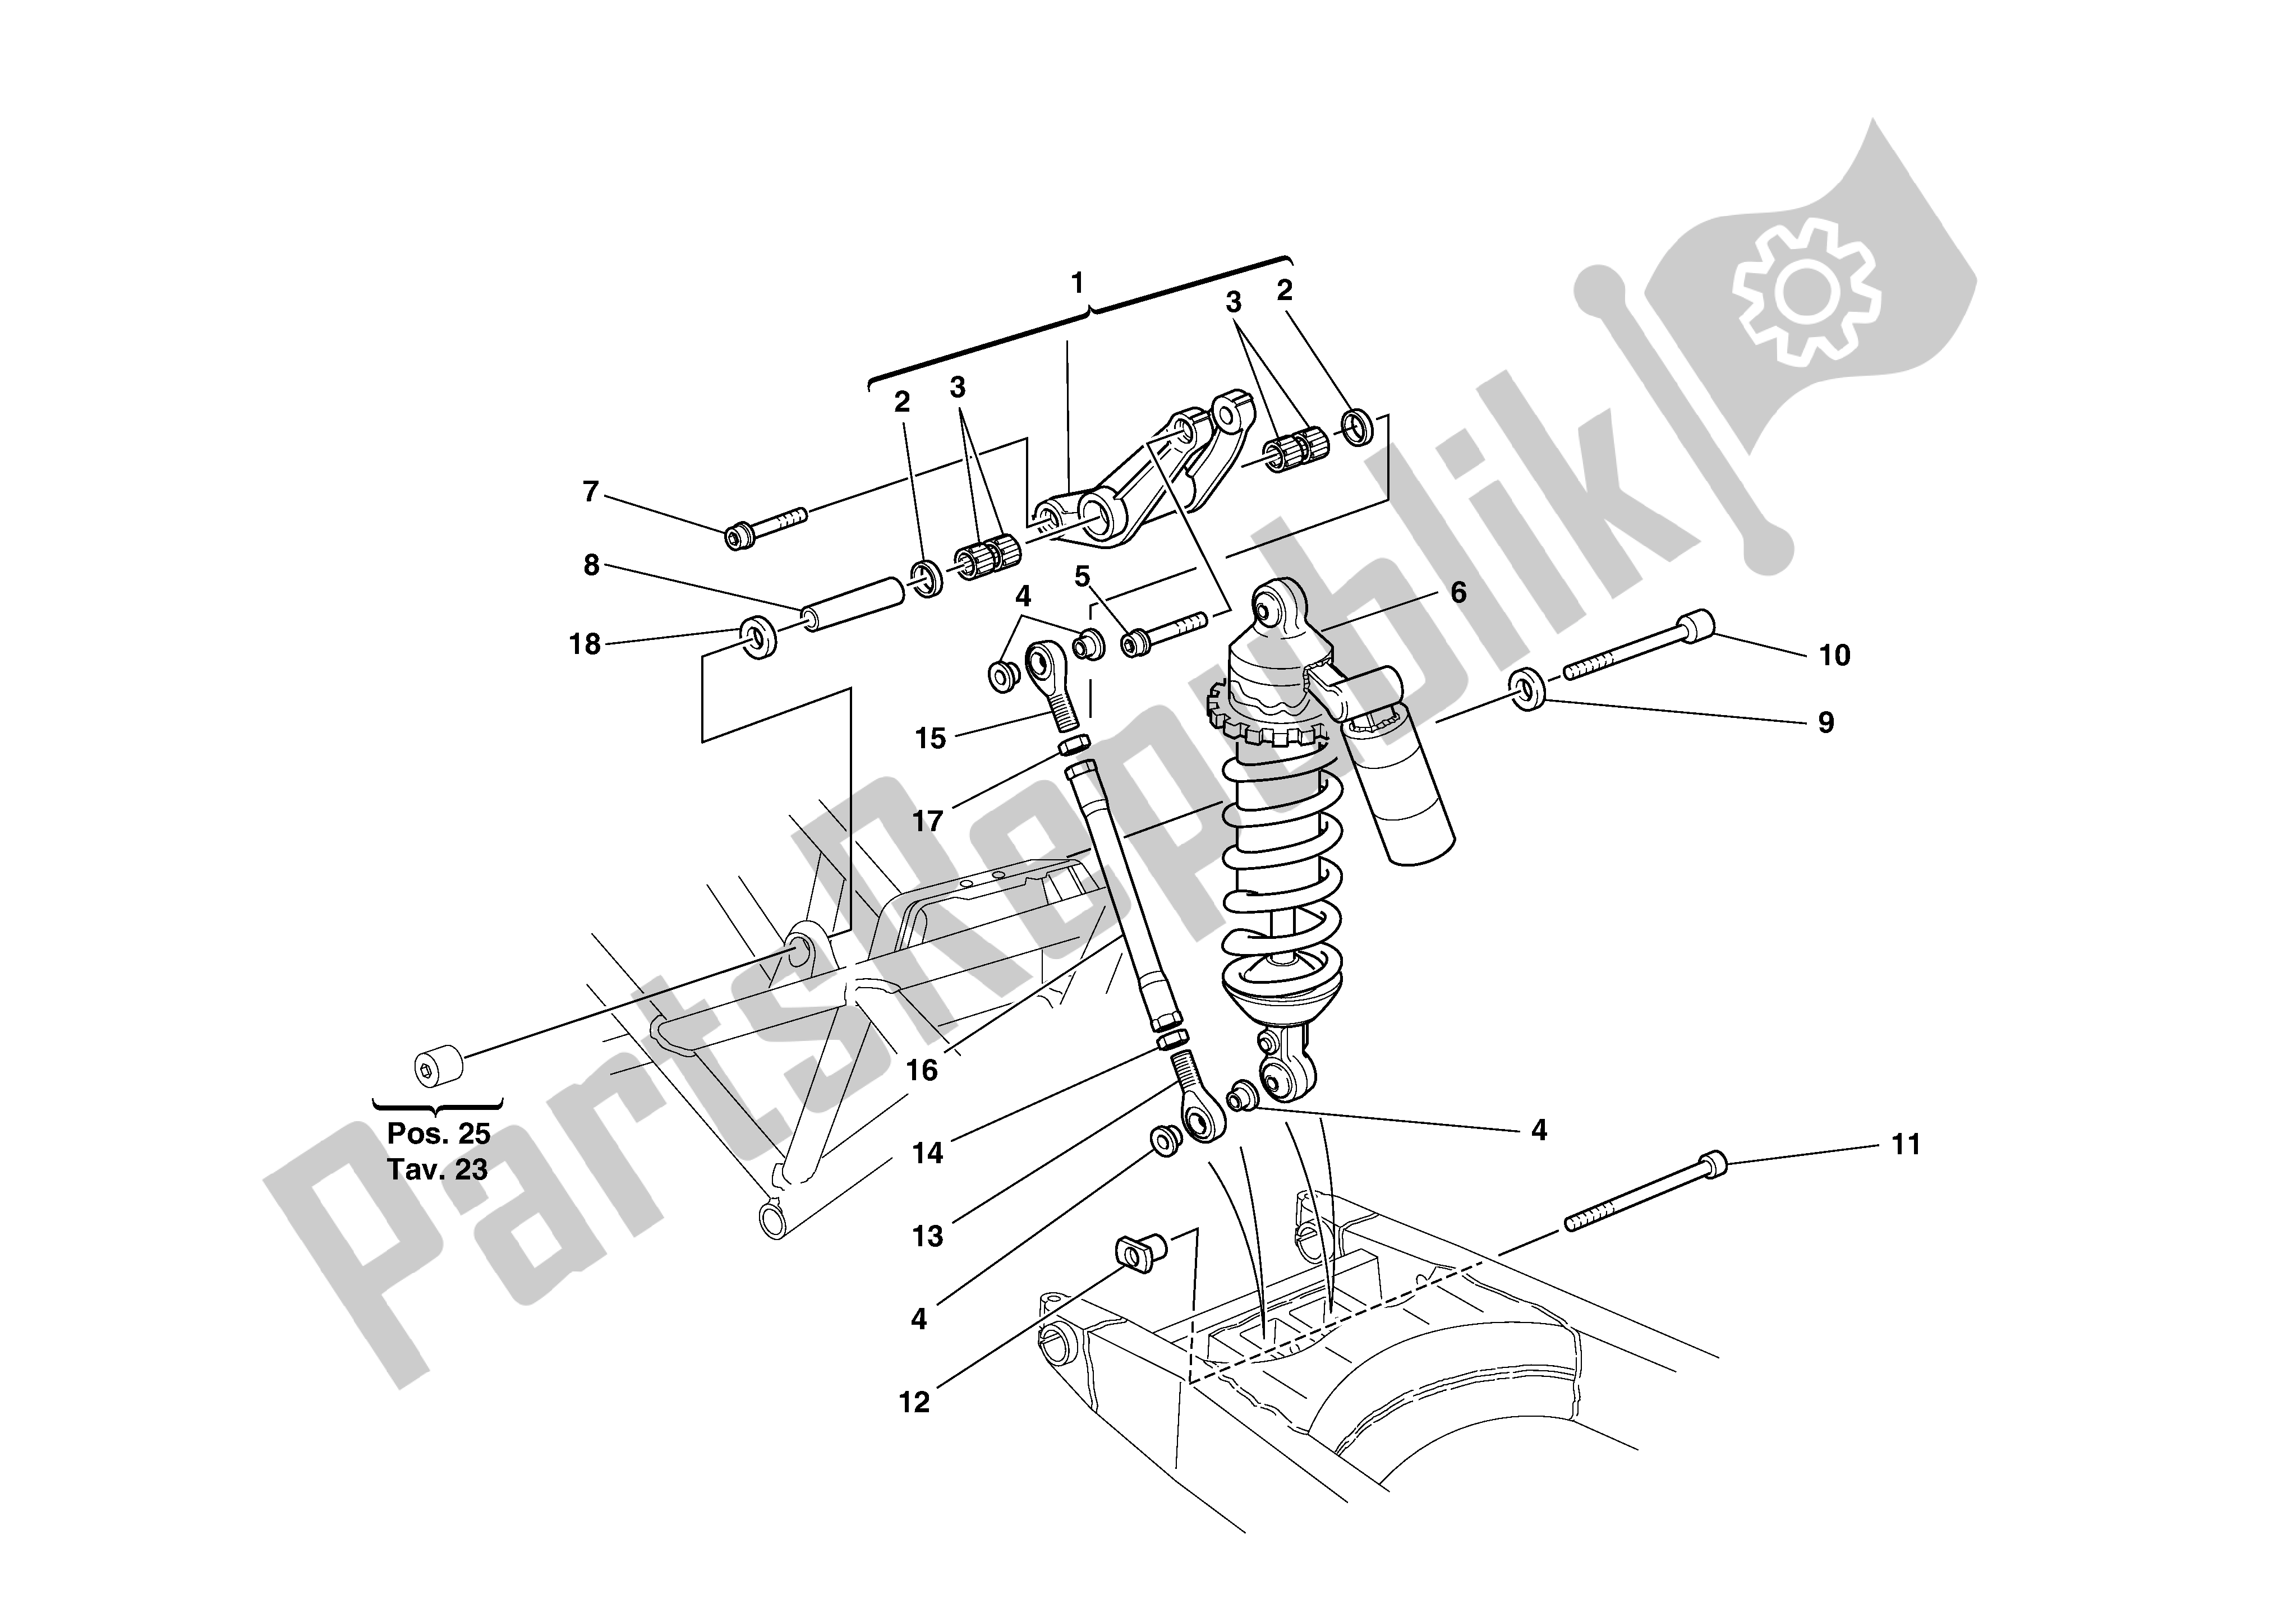 All parts for the Rear Suspension of the Ducati Monster S4 916 2002